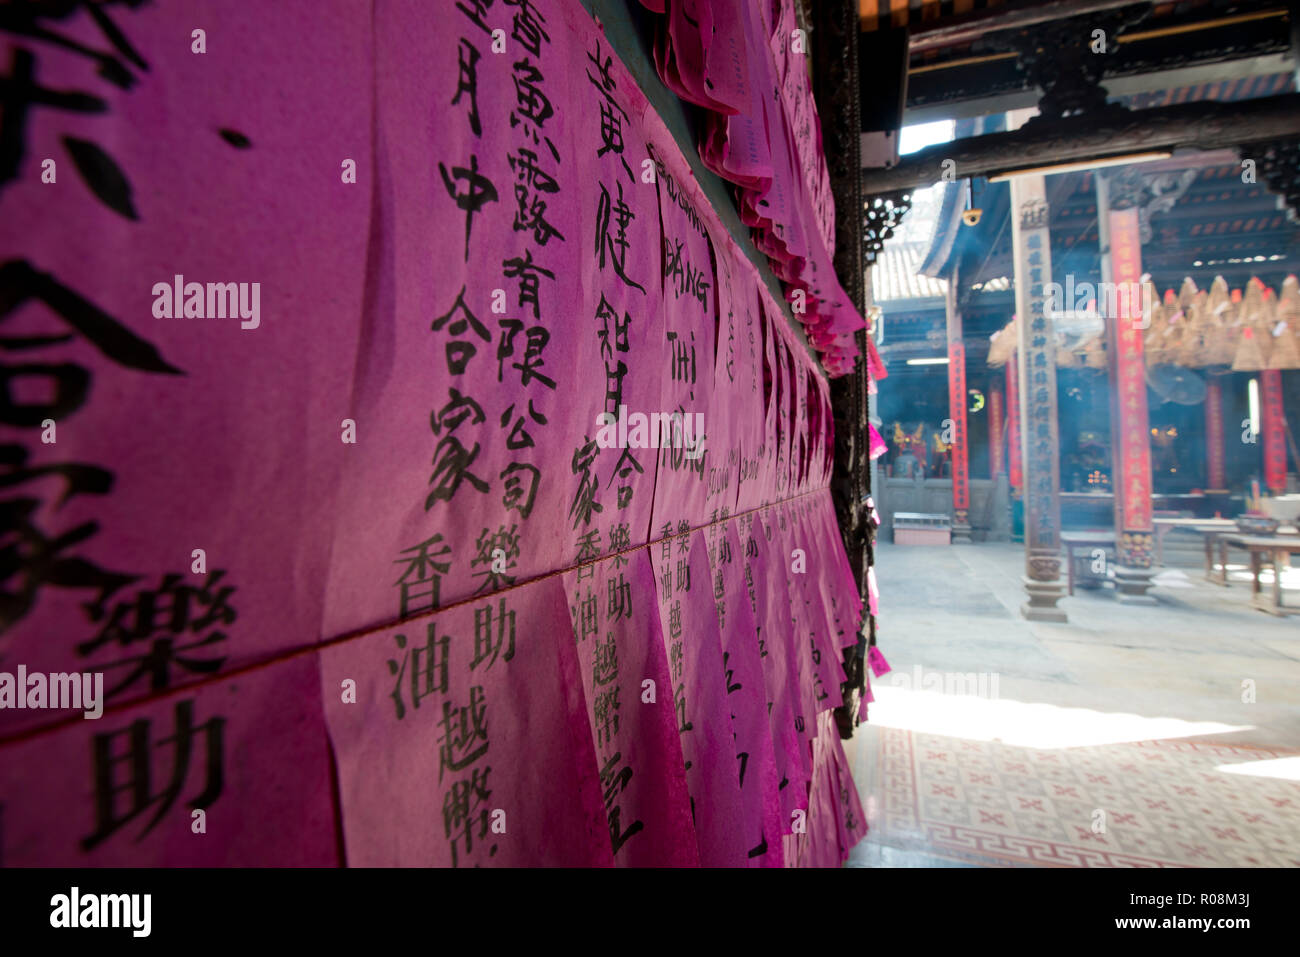 Prayer slip, black Chinese characters on pink tissue paper, in the temple Chua Thien Hau, Ho Chi Minh City, Saigon Stock Photo